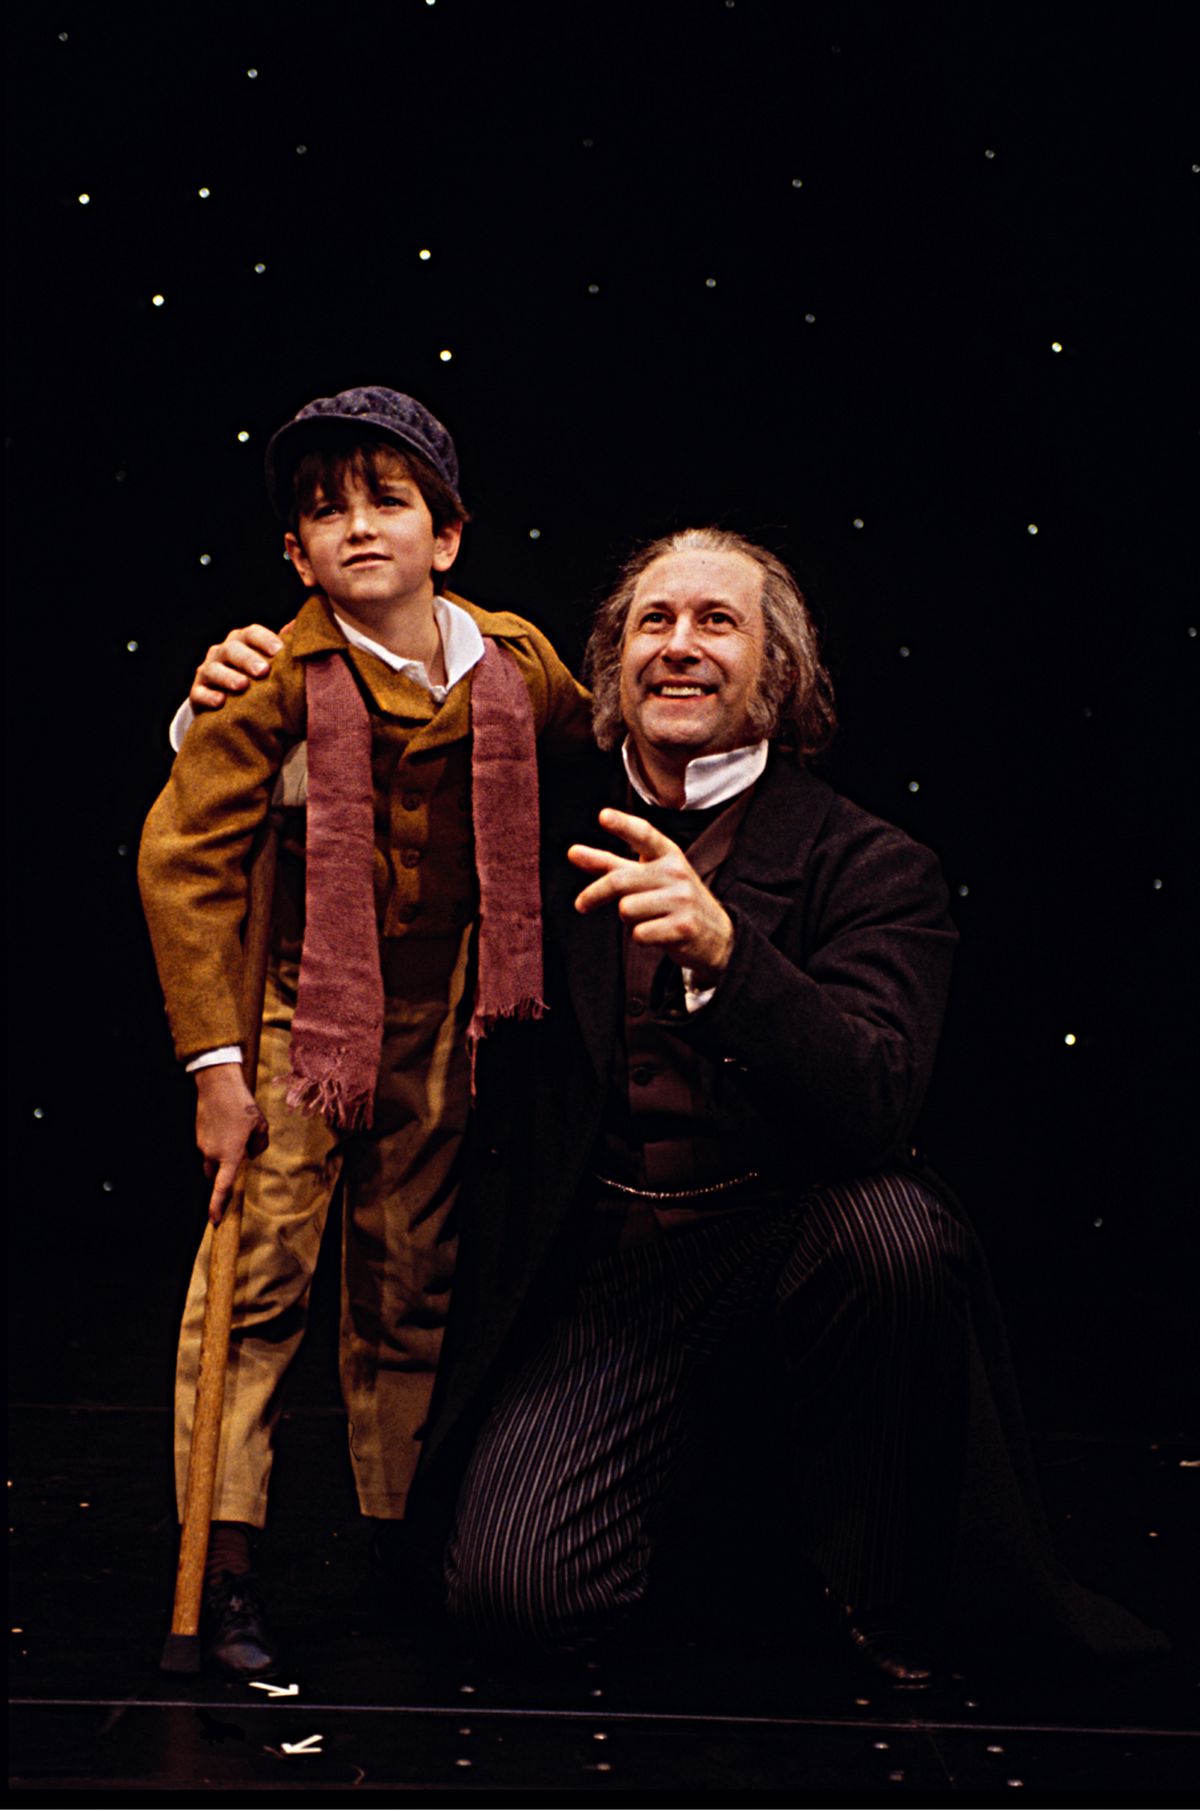 Actors recall their time as Tiny Tim in Goodman's 'Christmas Carol' - Chicago Sun-Times